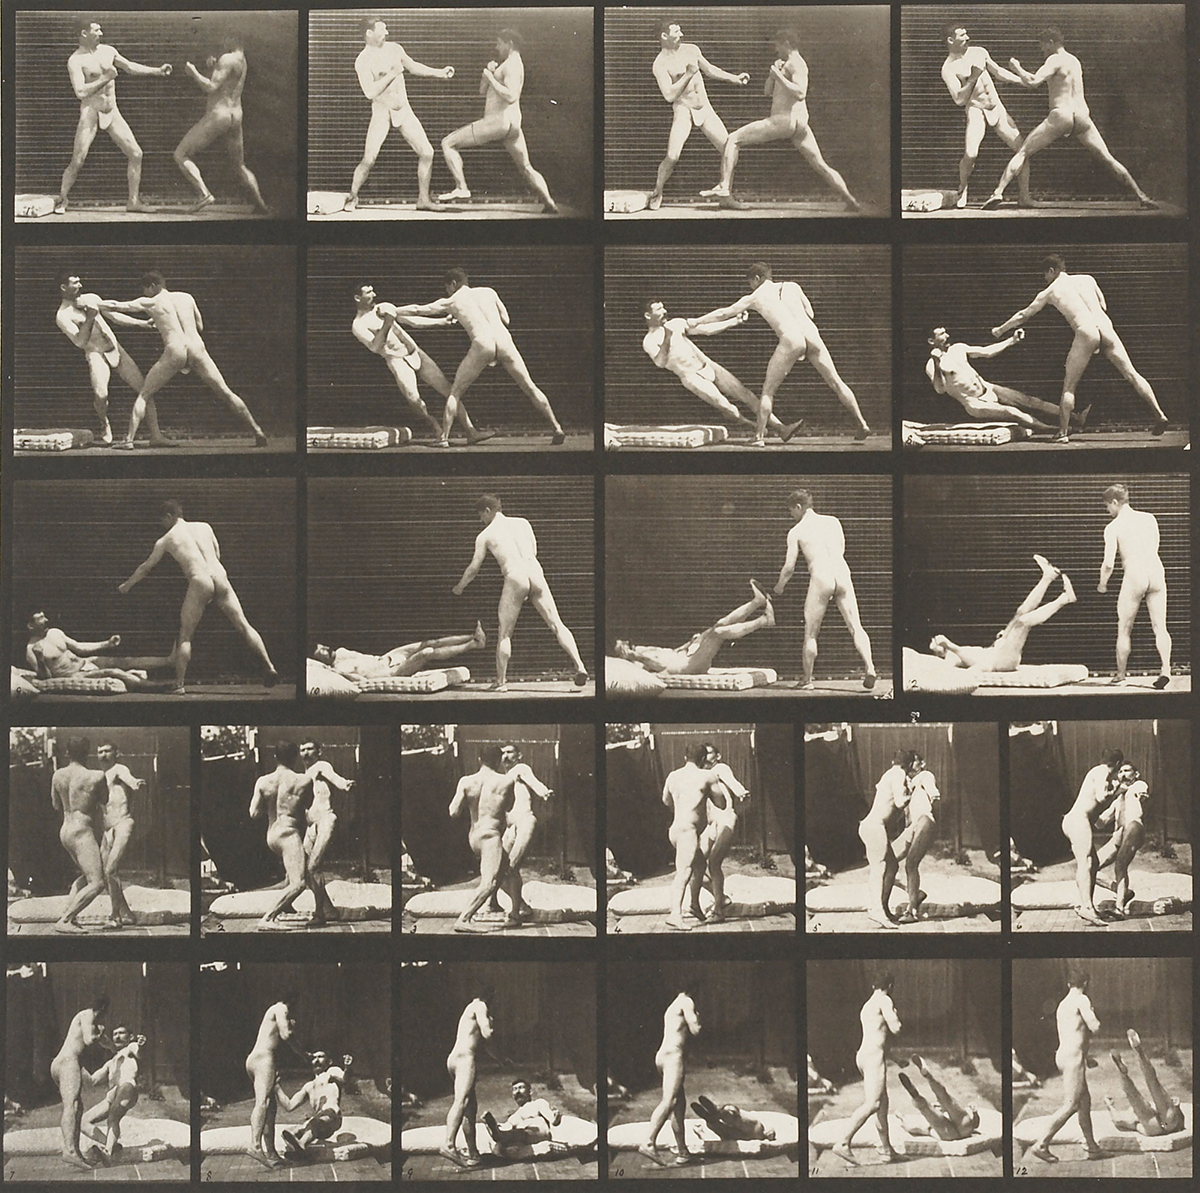 Exposed: Eadweard Muybridge and the Study of Motion